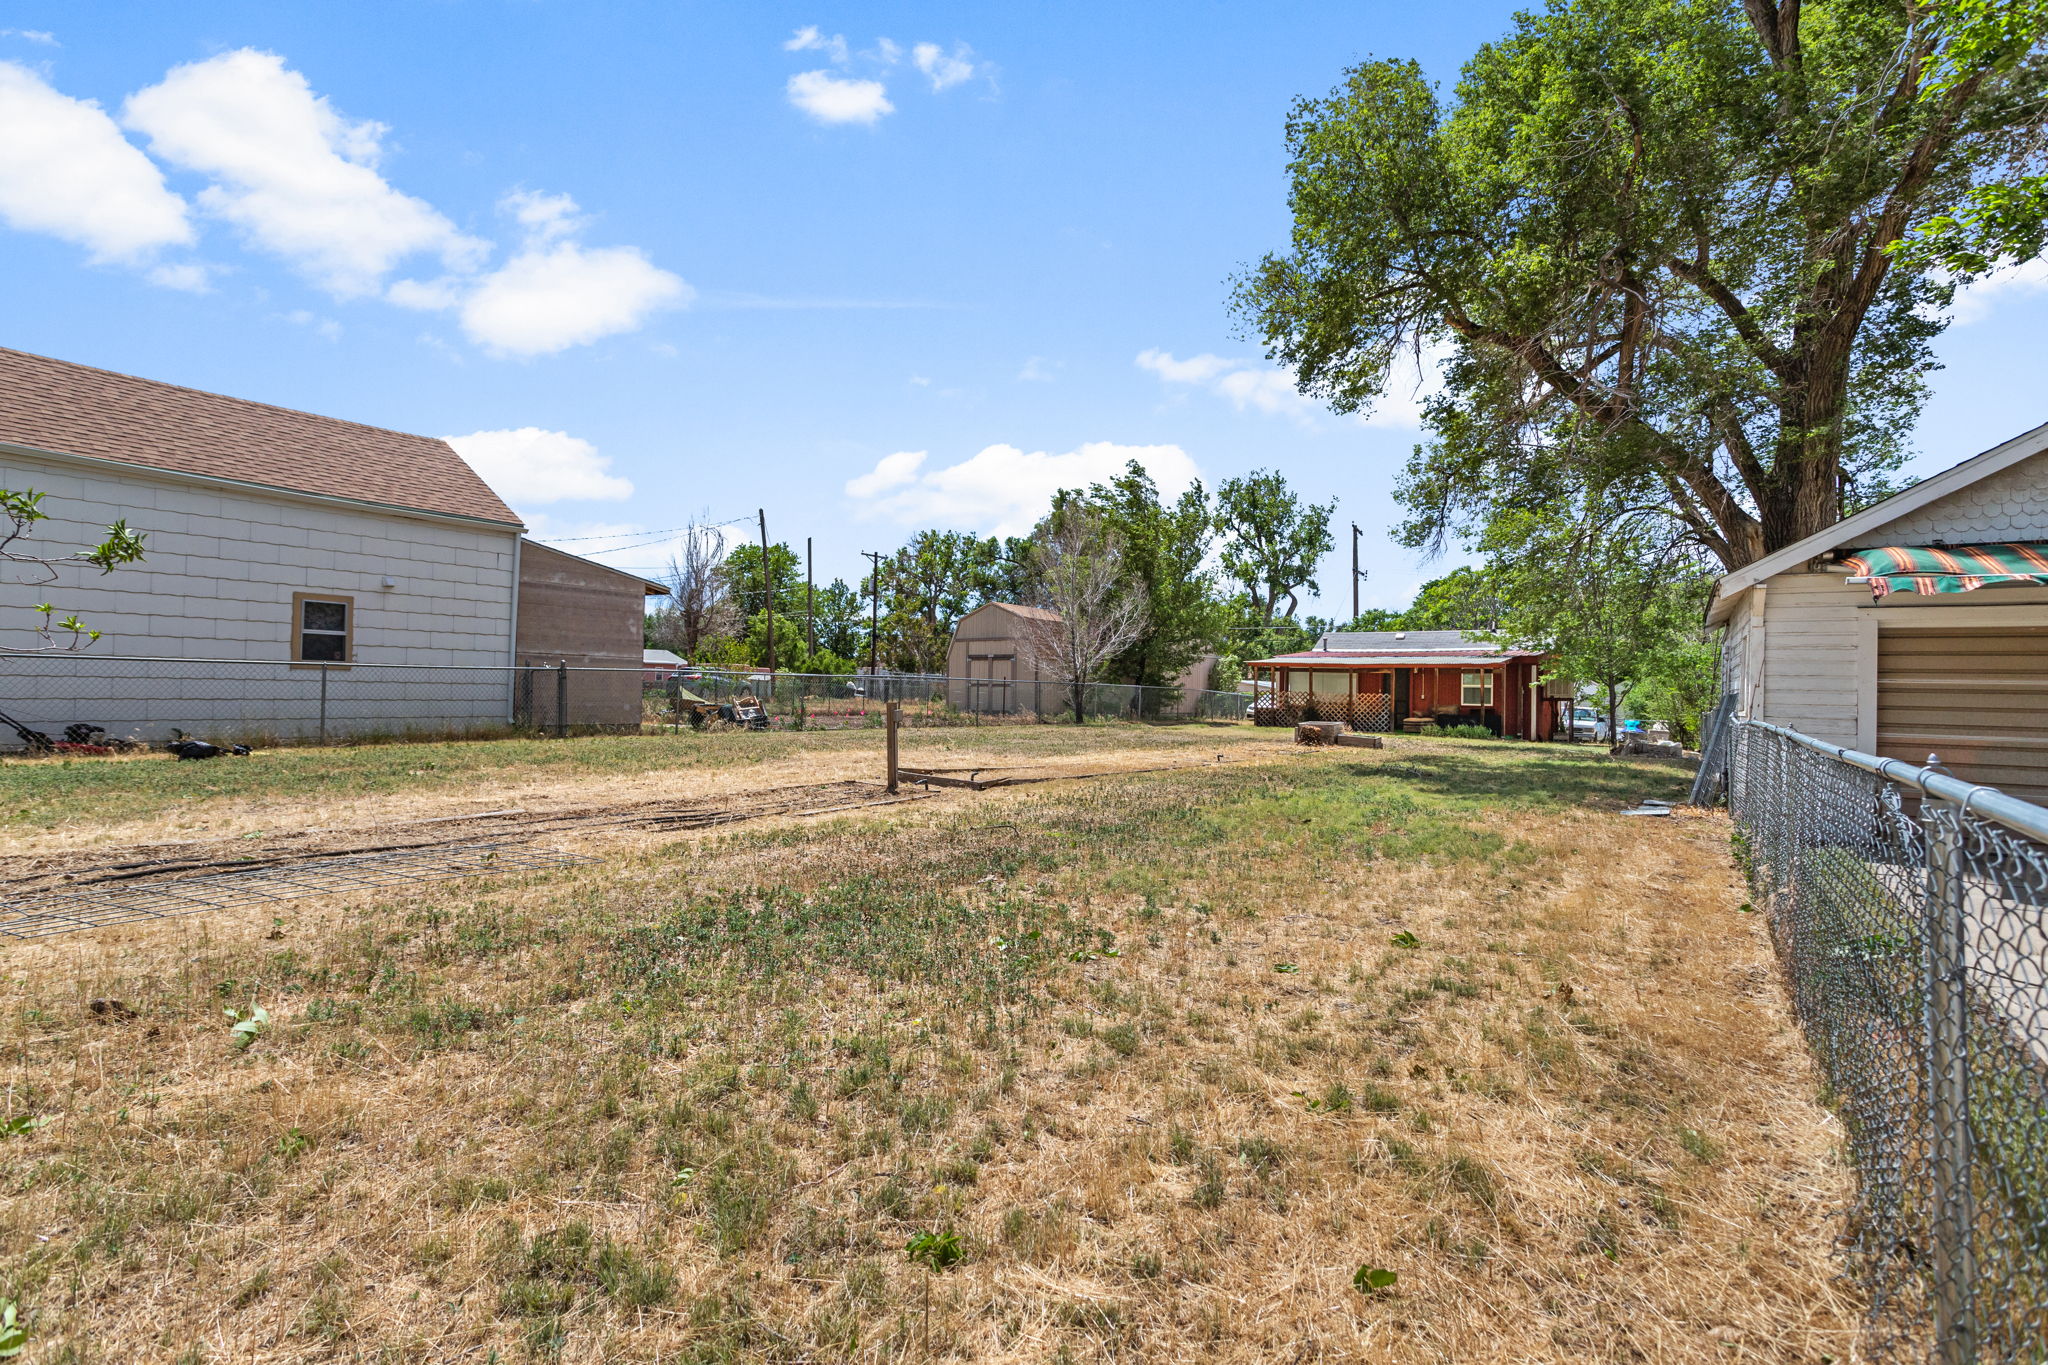  2025 5th Ave, Greeley, CO 80631, US Photo 3